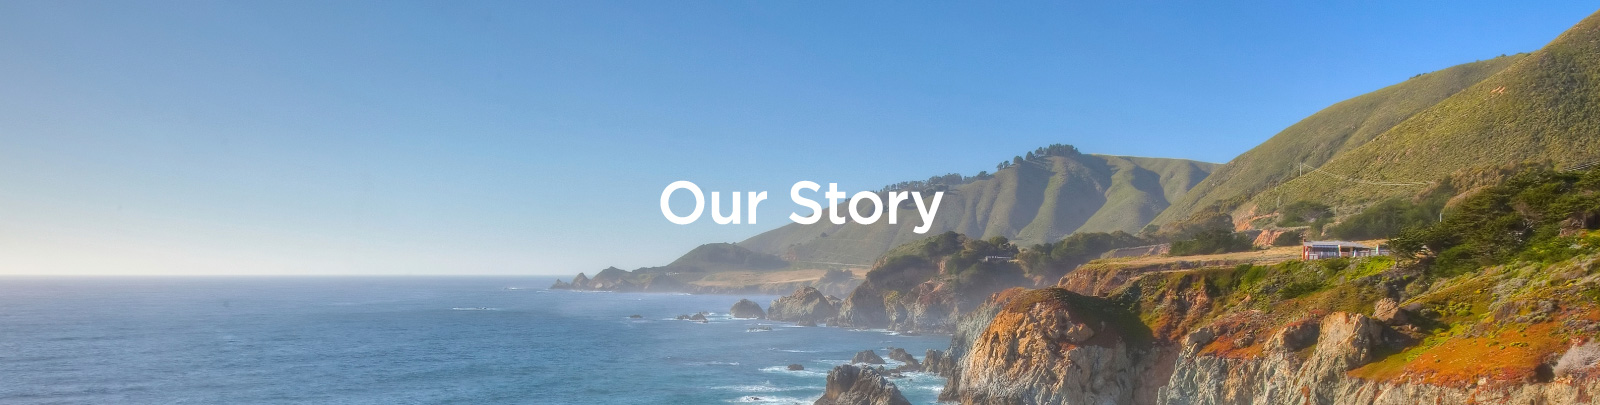 phc-ourstory-banner